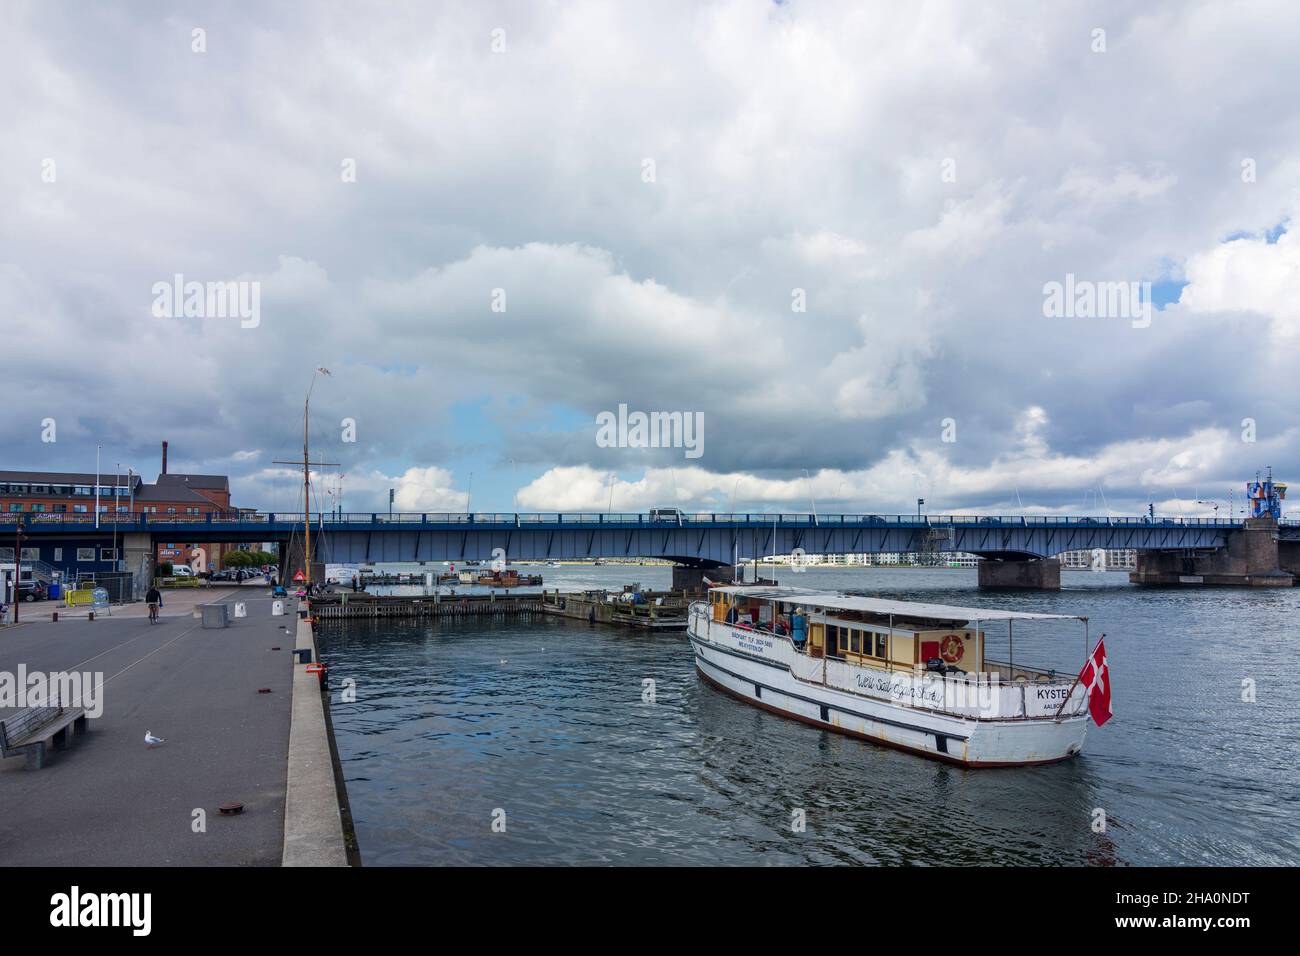 Kysten High Resolution Stock Photography and Images - Alamy